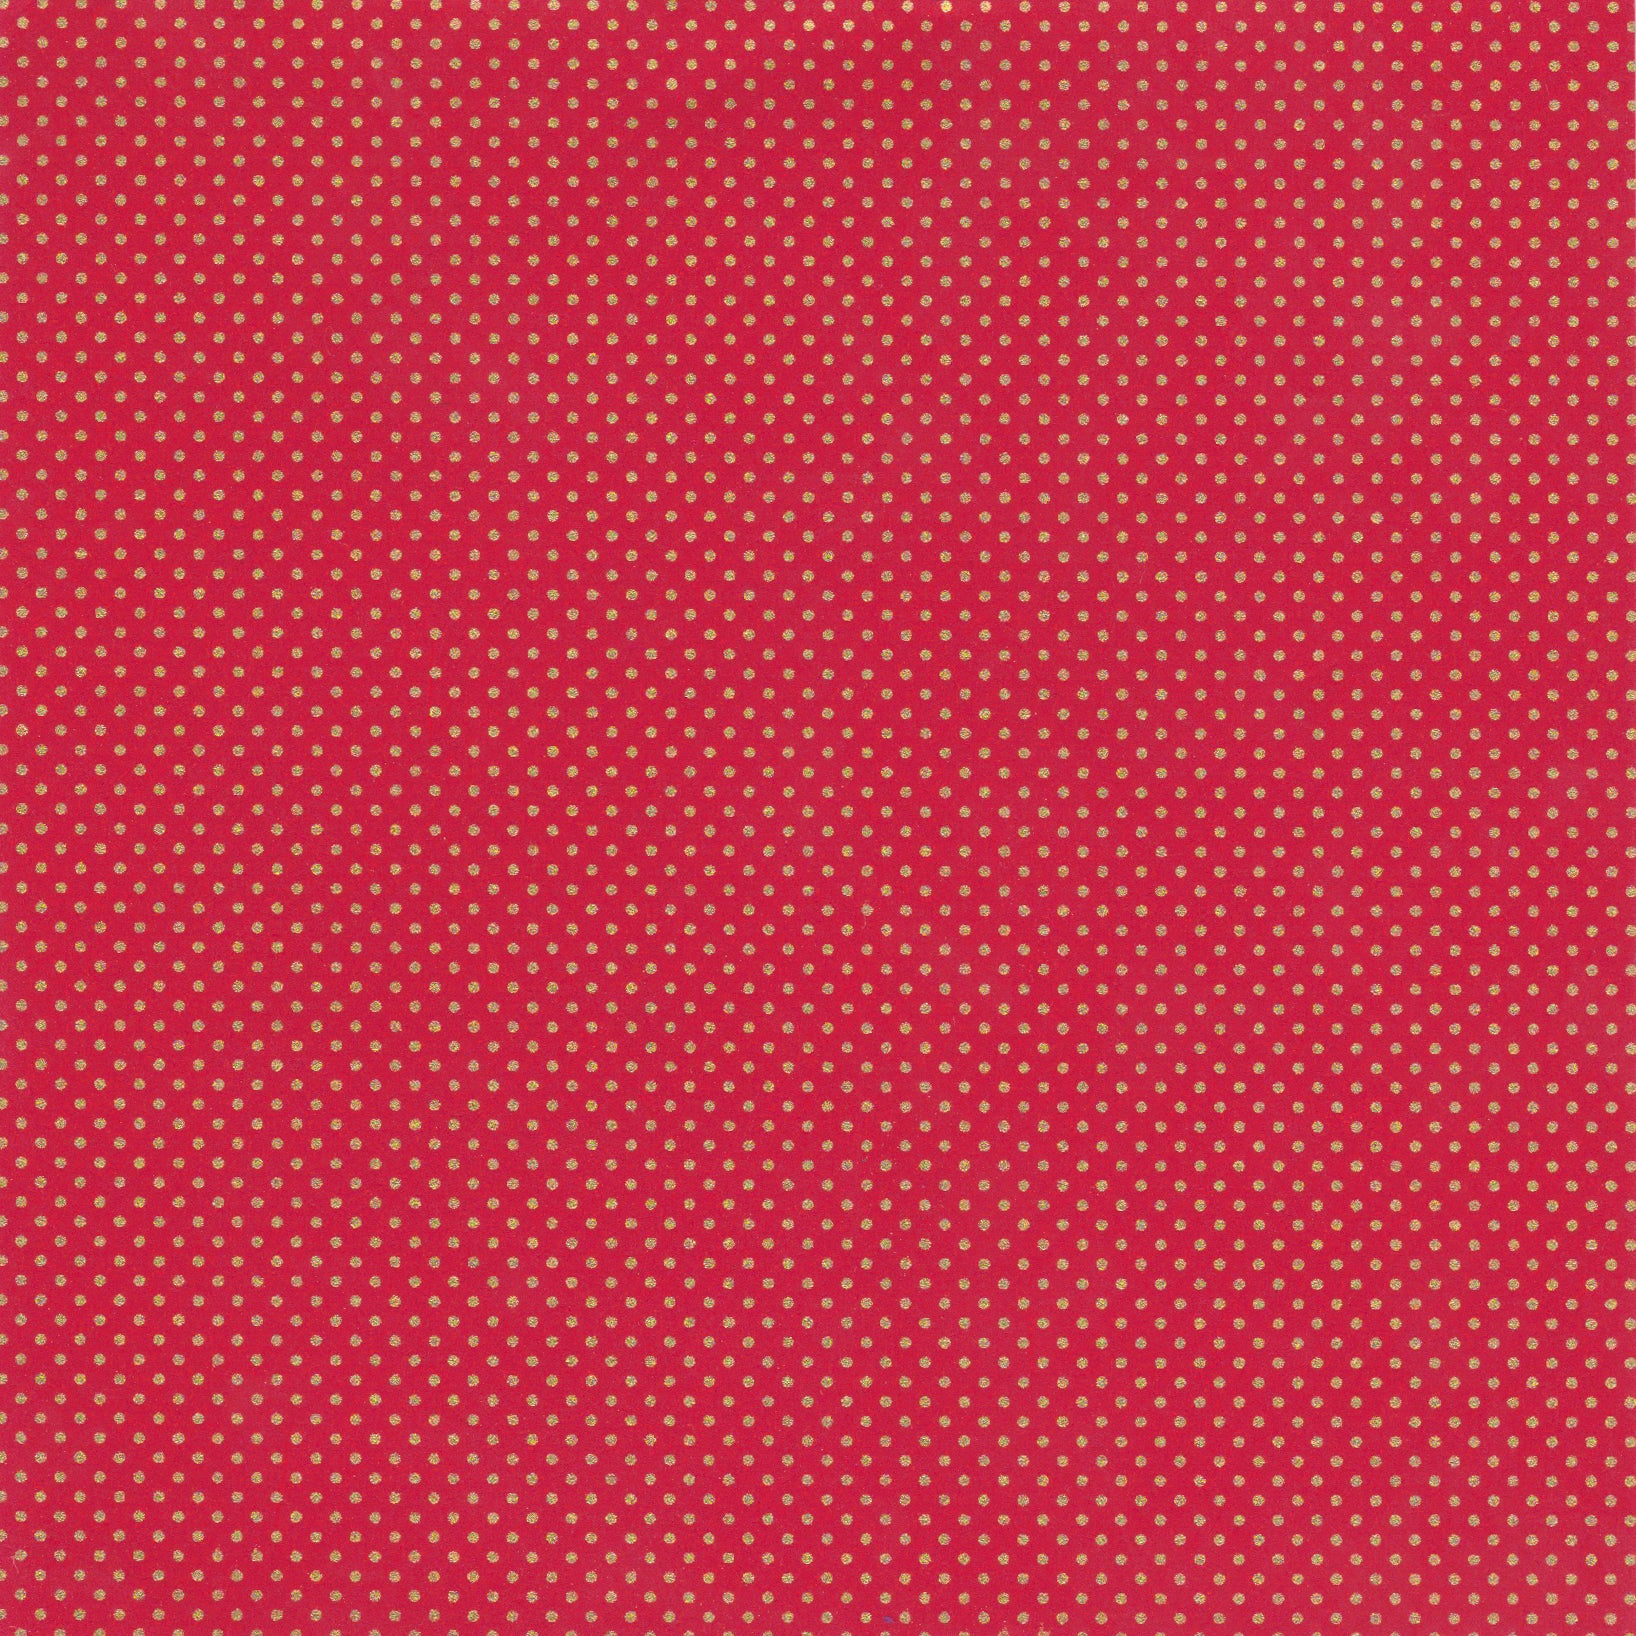 Yuzen Washi Wrapping Paper HZ-281 - Small Polka Dot Red - washi paper - Lavender Home London